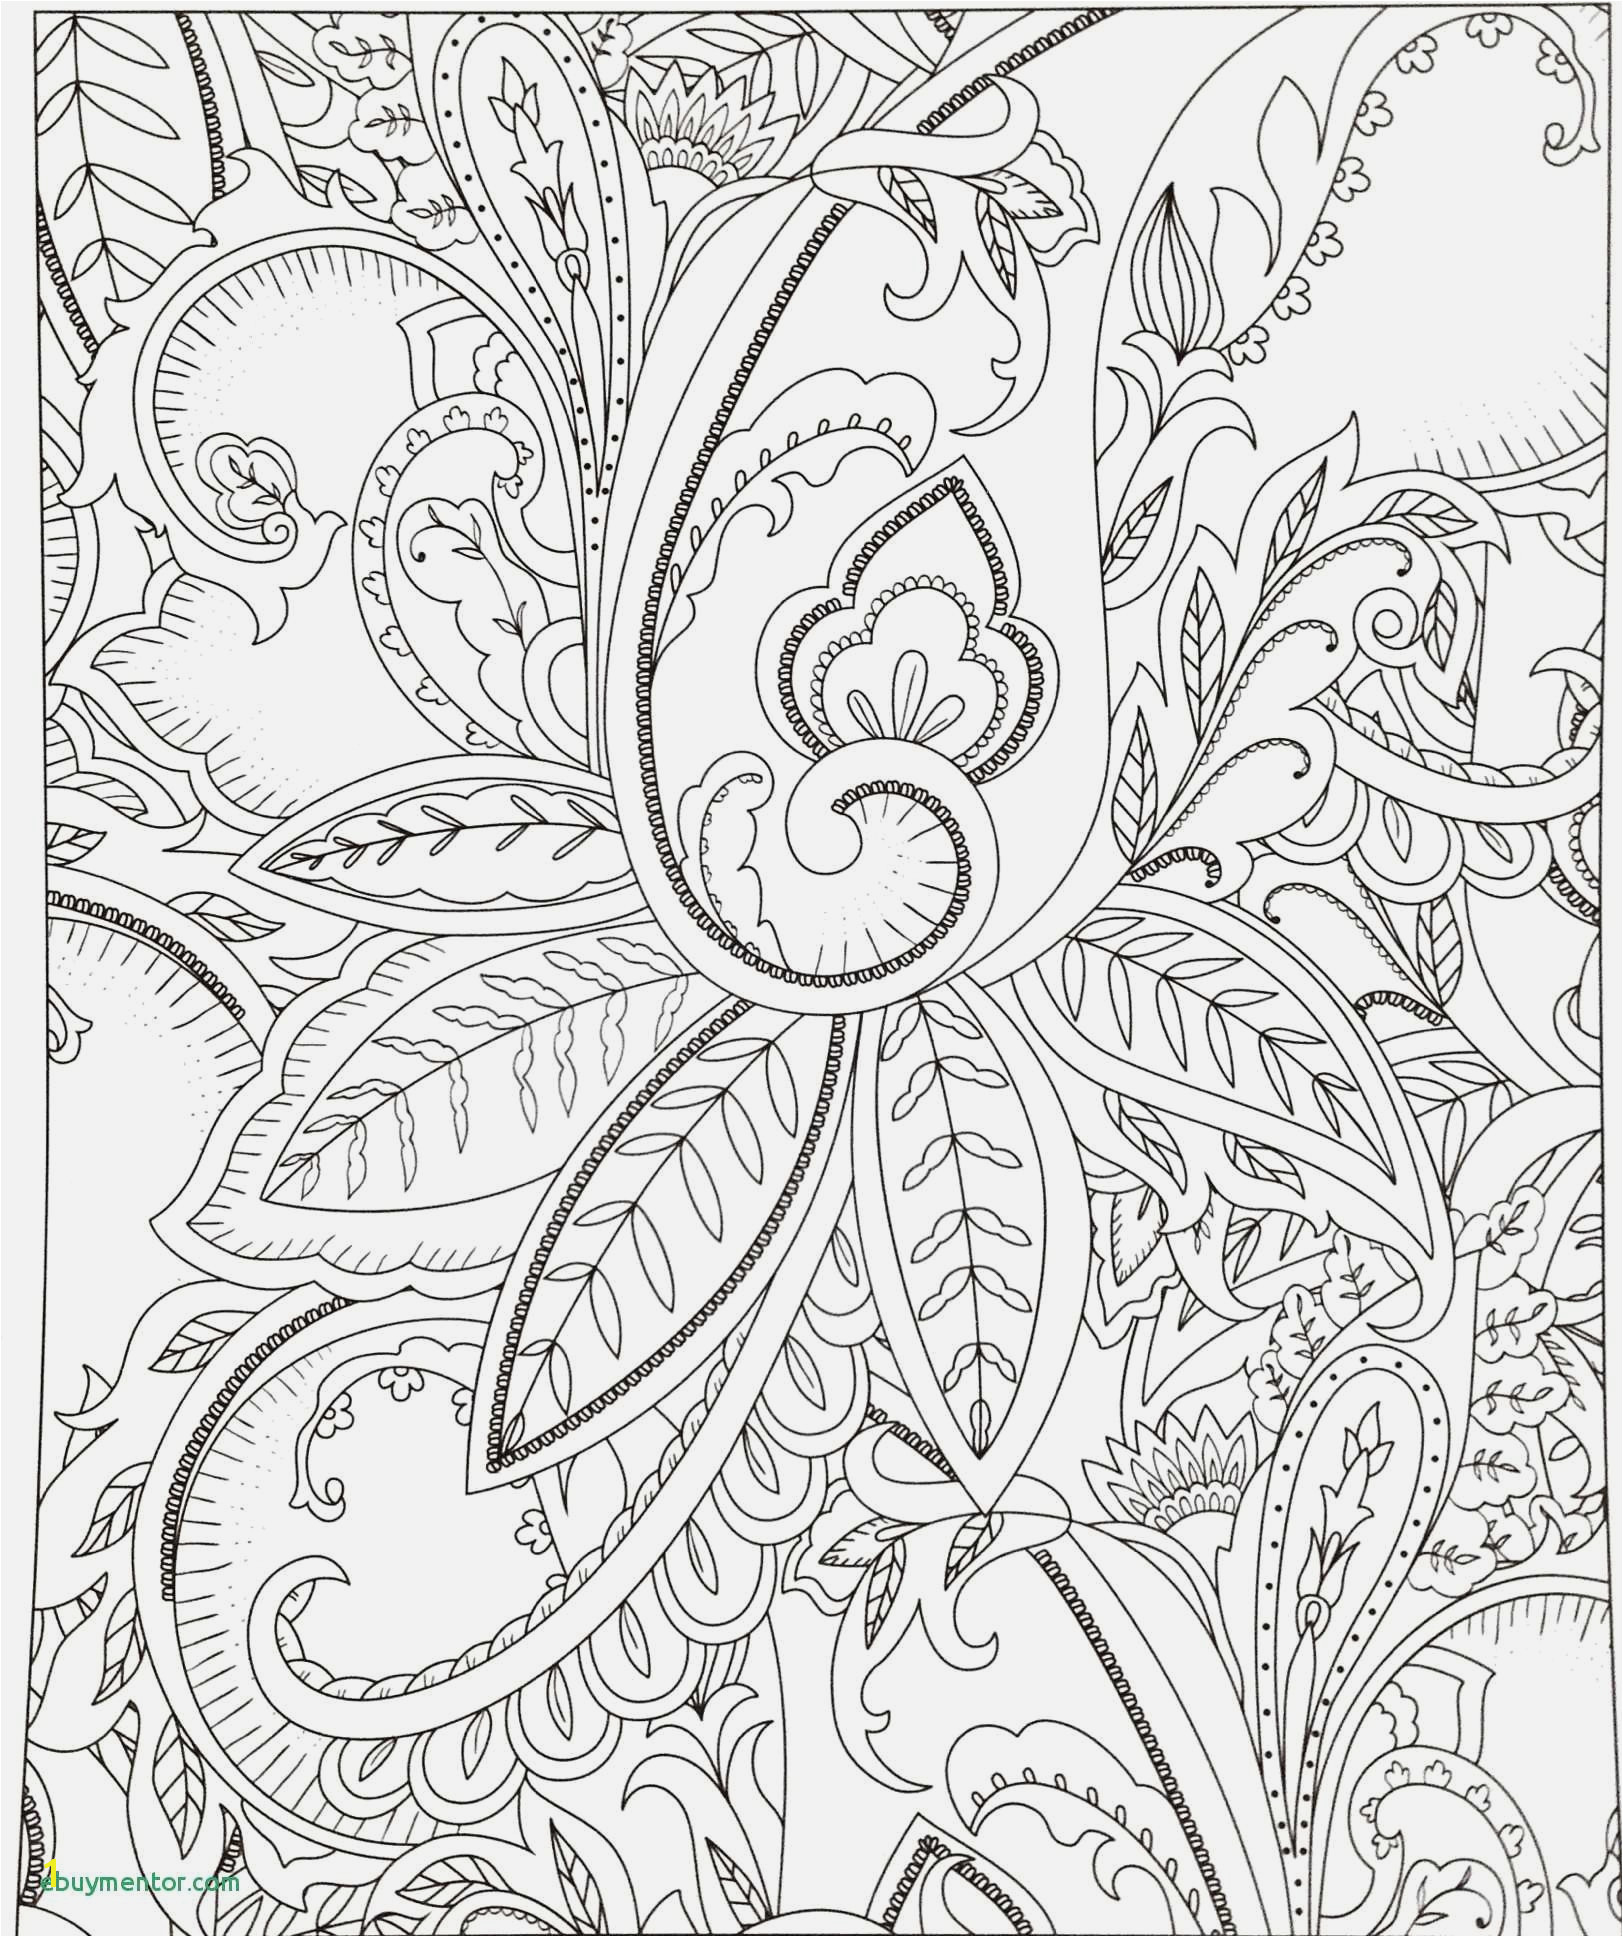 Design Coloring Pages Printable Goat Coloring Pages Printable Unique Coloring Sheet for Fall Design